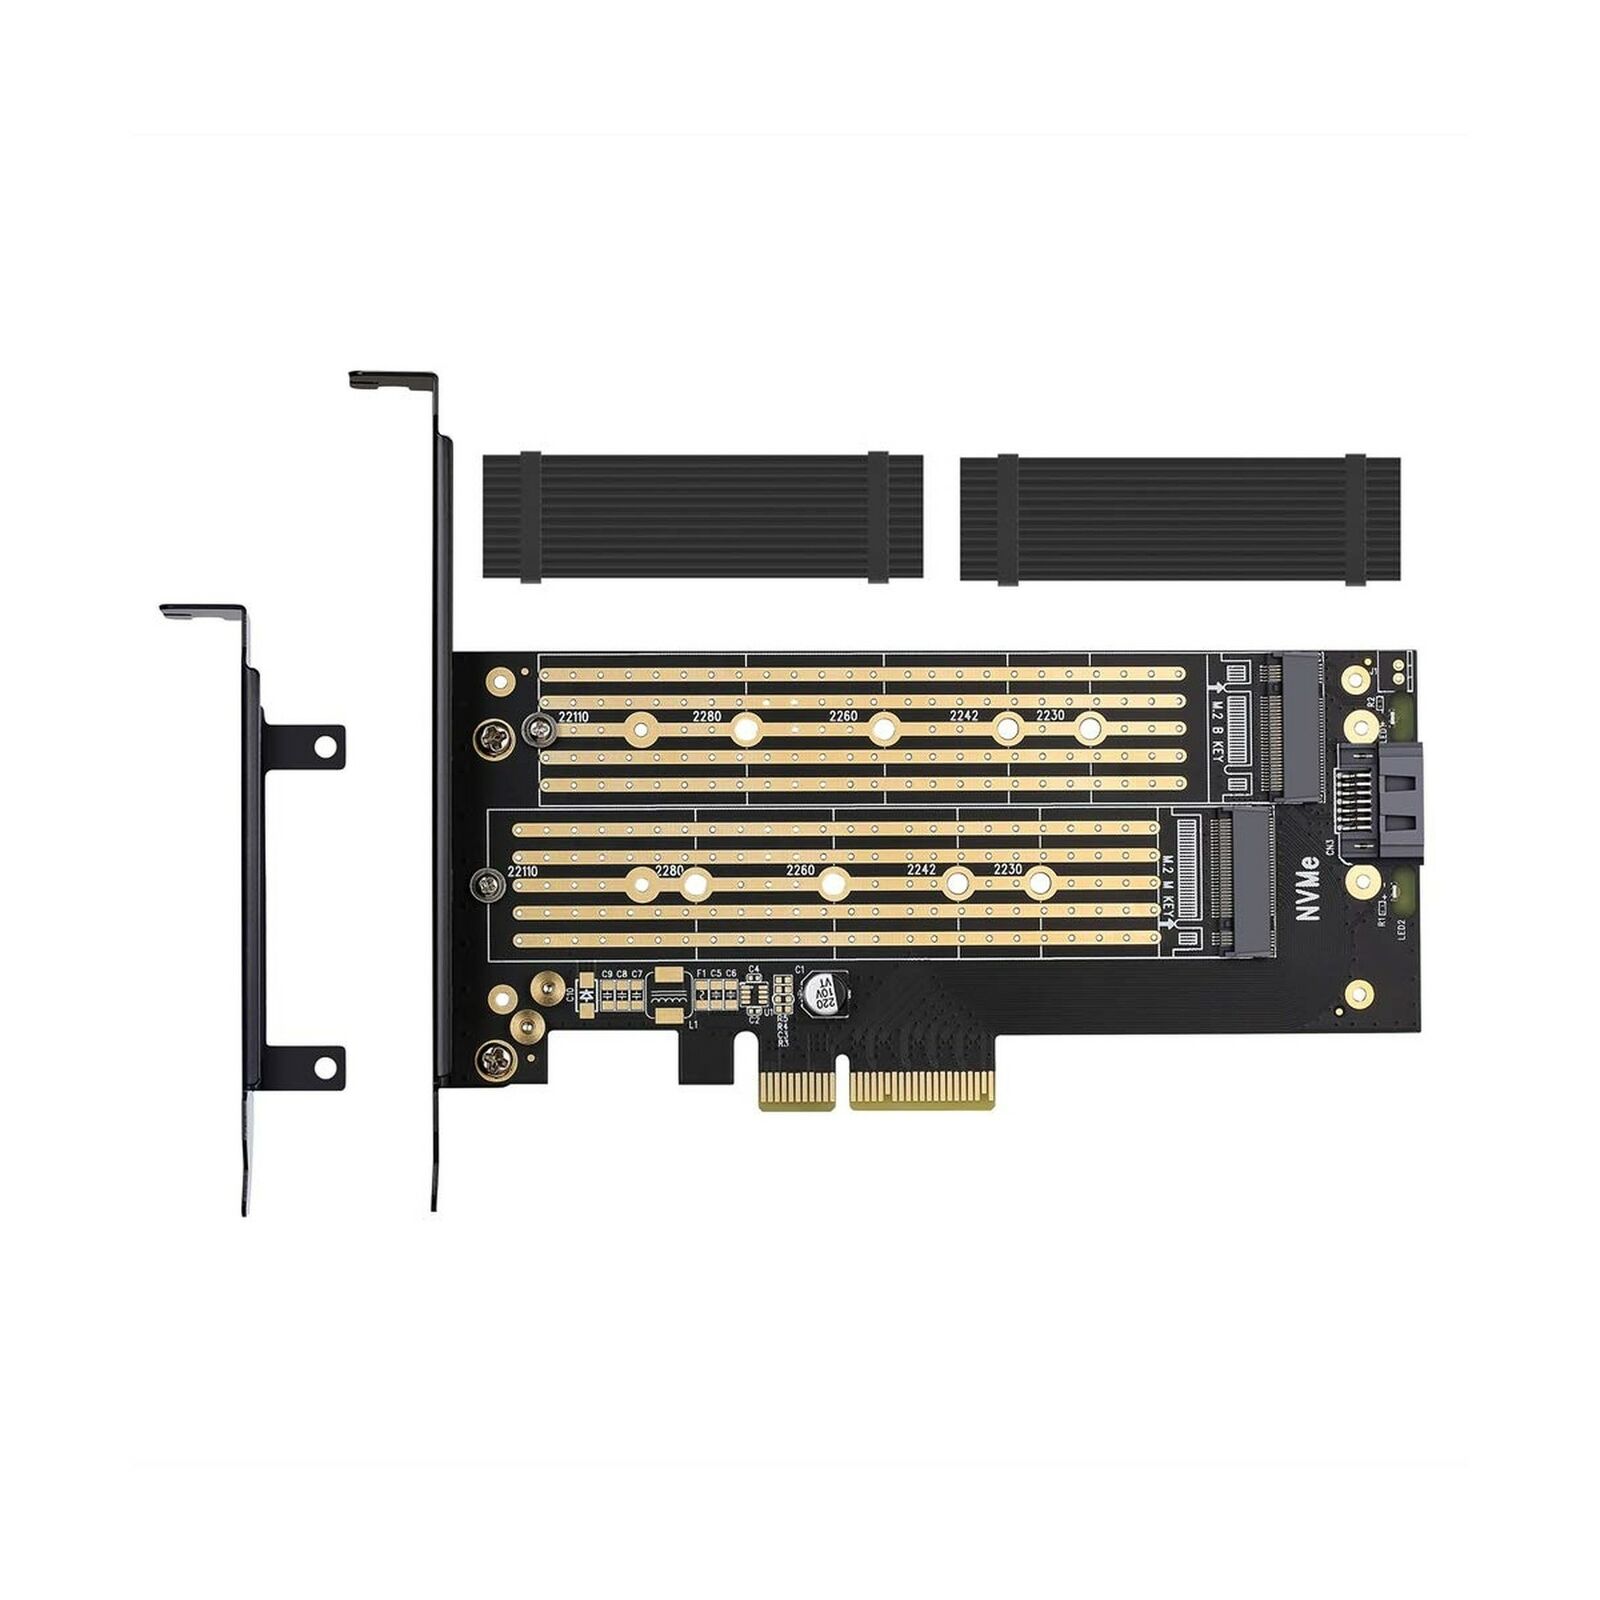 Dual M.2 PCIE Adapter for SATA or PCIE NVMe SSD with Advanced Heat Sink Solut...